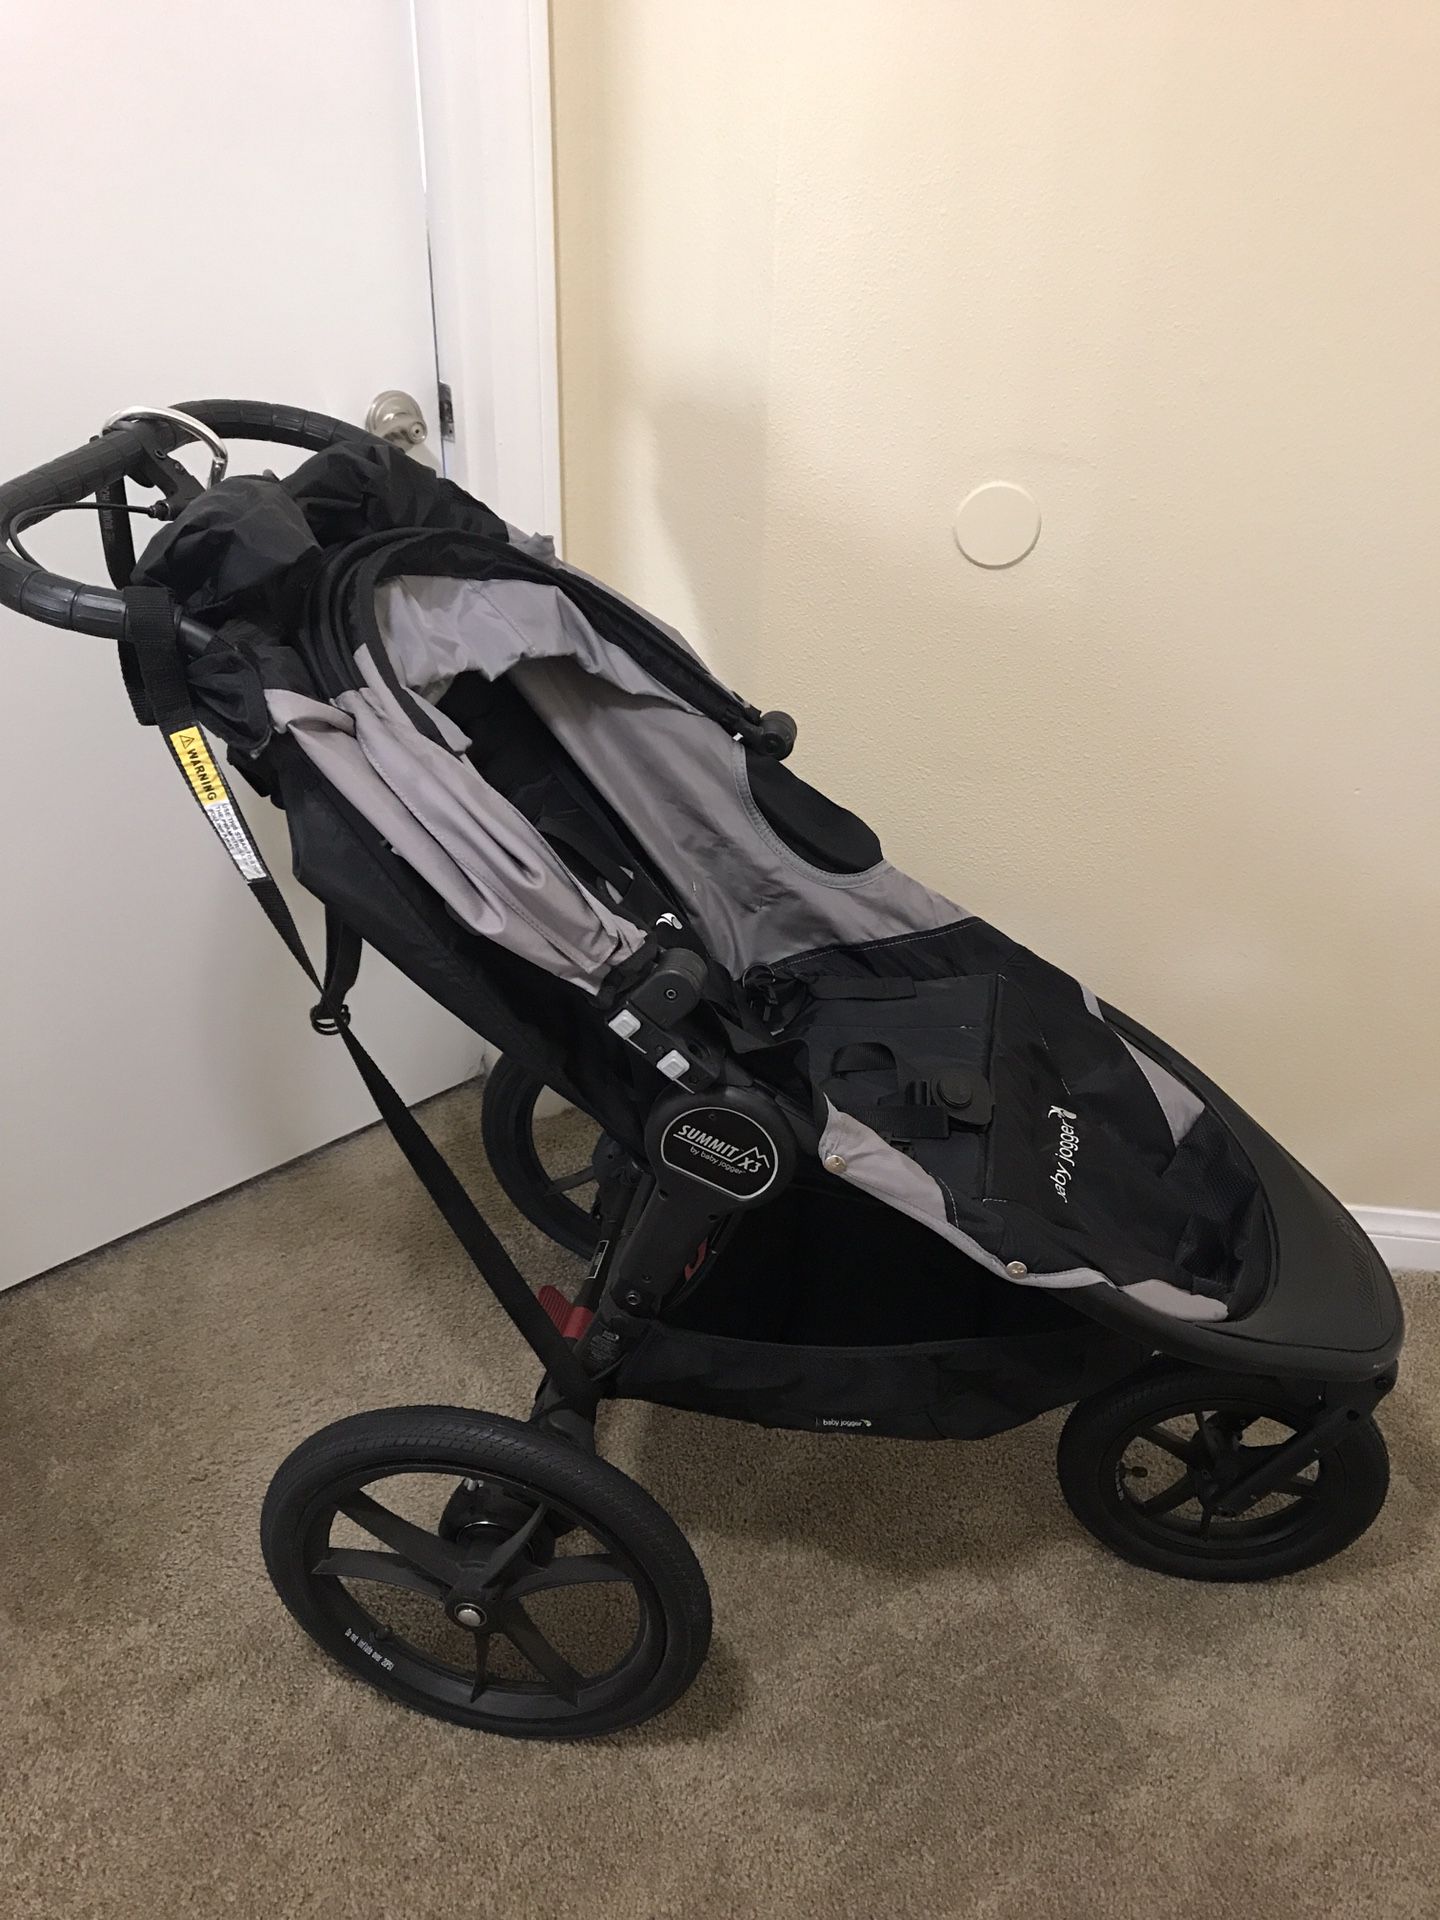 FREE Babyjogger Summit X3 stroller black and gray